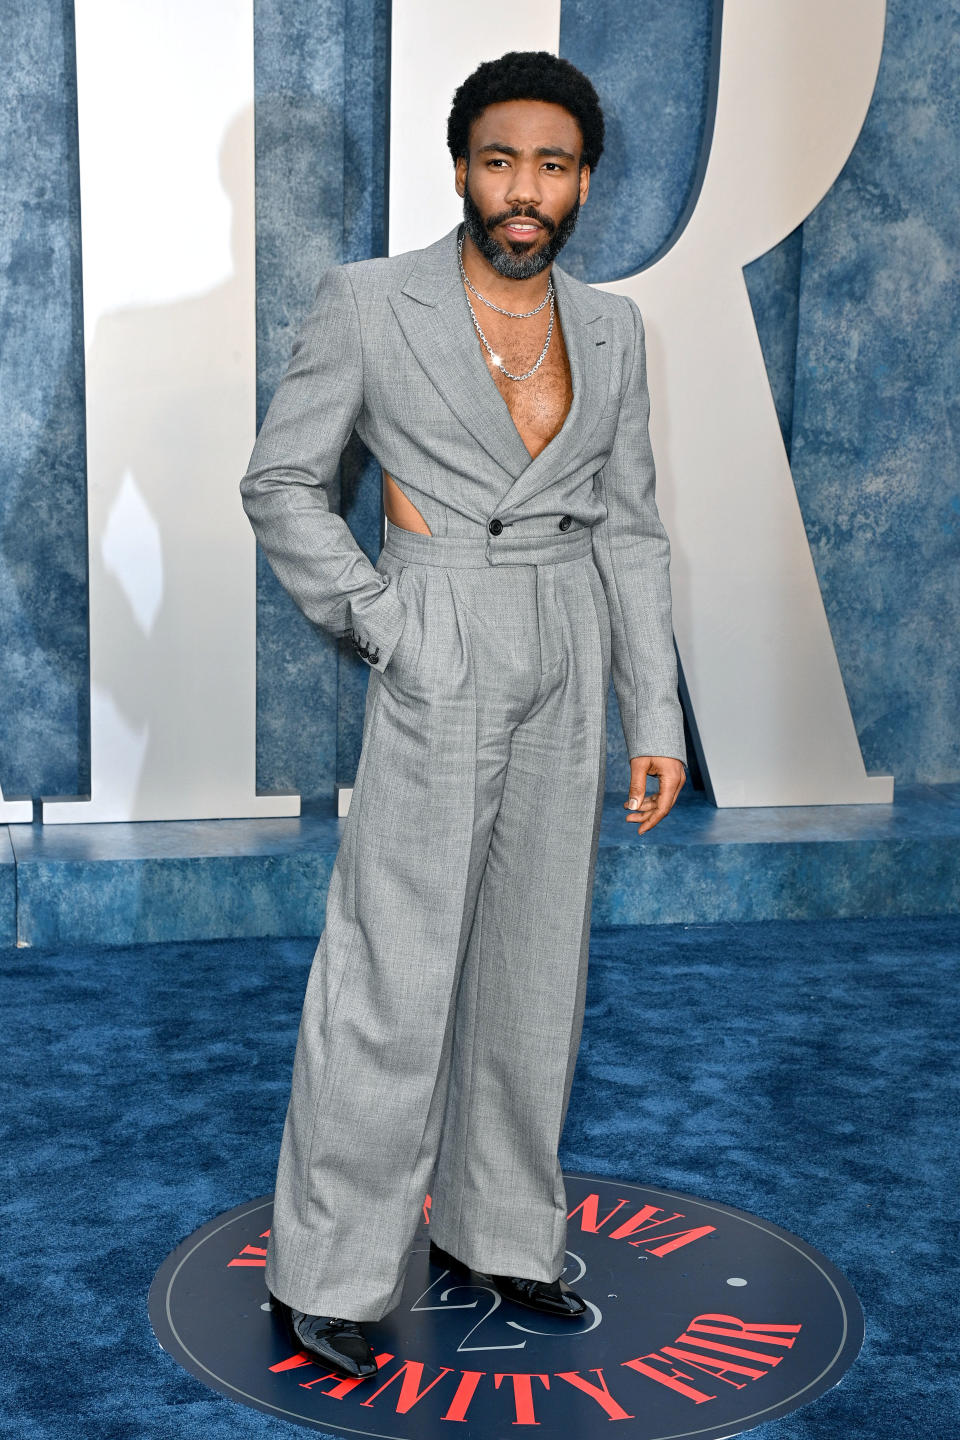 BEVERLY HILLS, CALIFORNIA - MARCH 12: Donald Glover attends the 2023 Vanity Fair Oscar Party Hosted By Radhika Jones at Wallis Annenberg Center for the Performing Arts on March 12, 2023 in Beverly Hills, California. (Photo by Lionel Hahn/Getty Images)